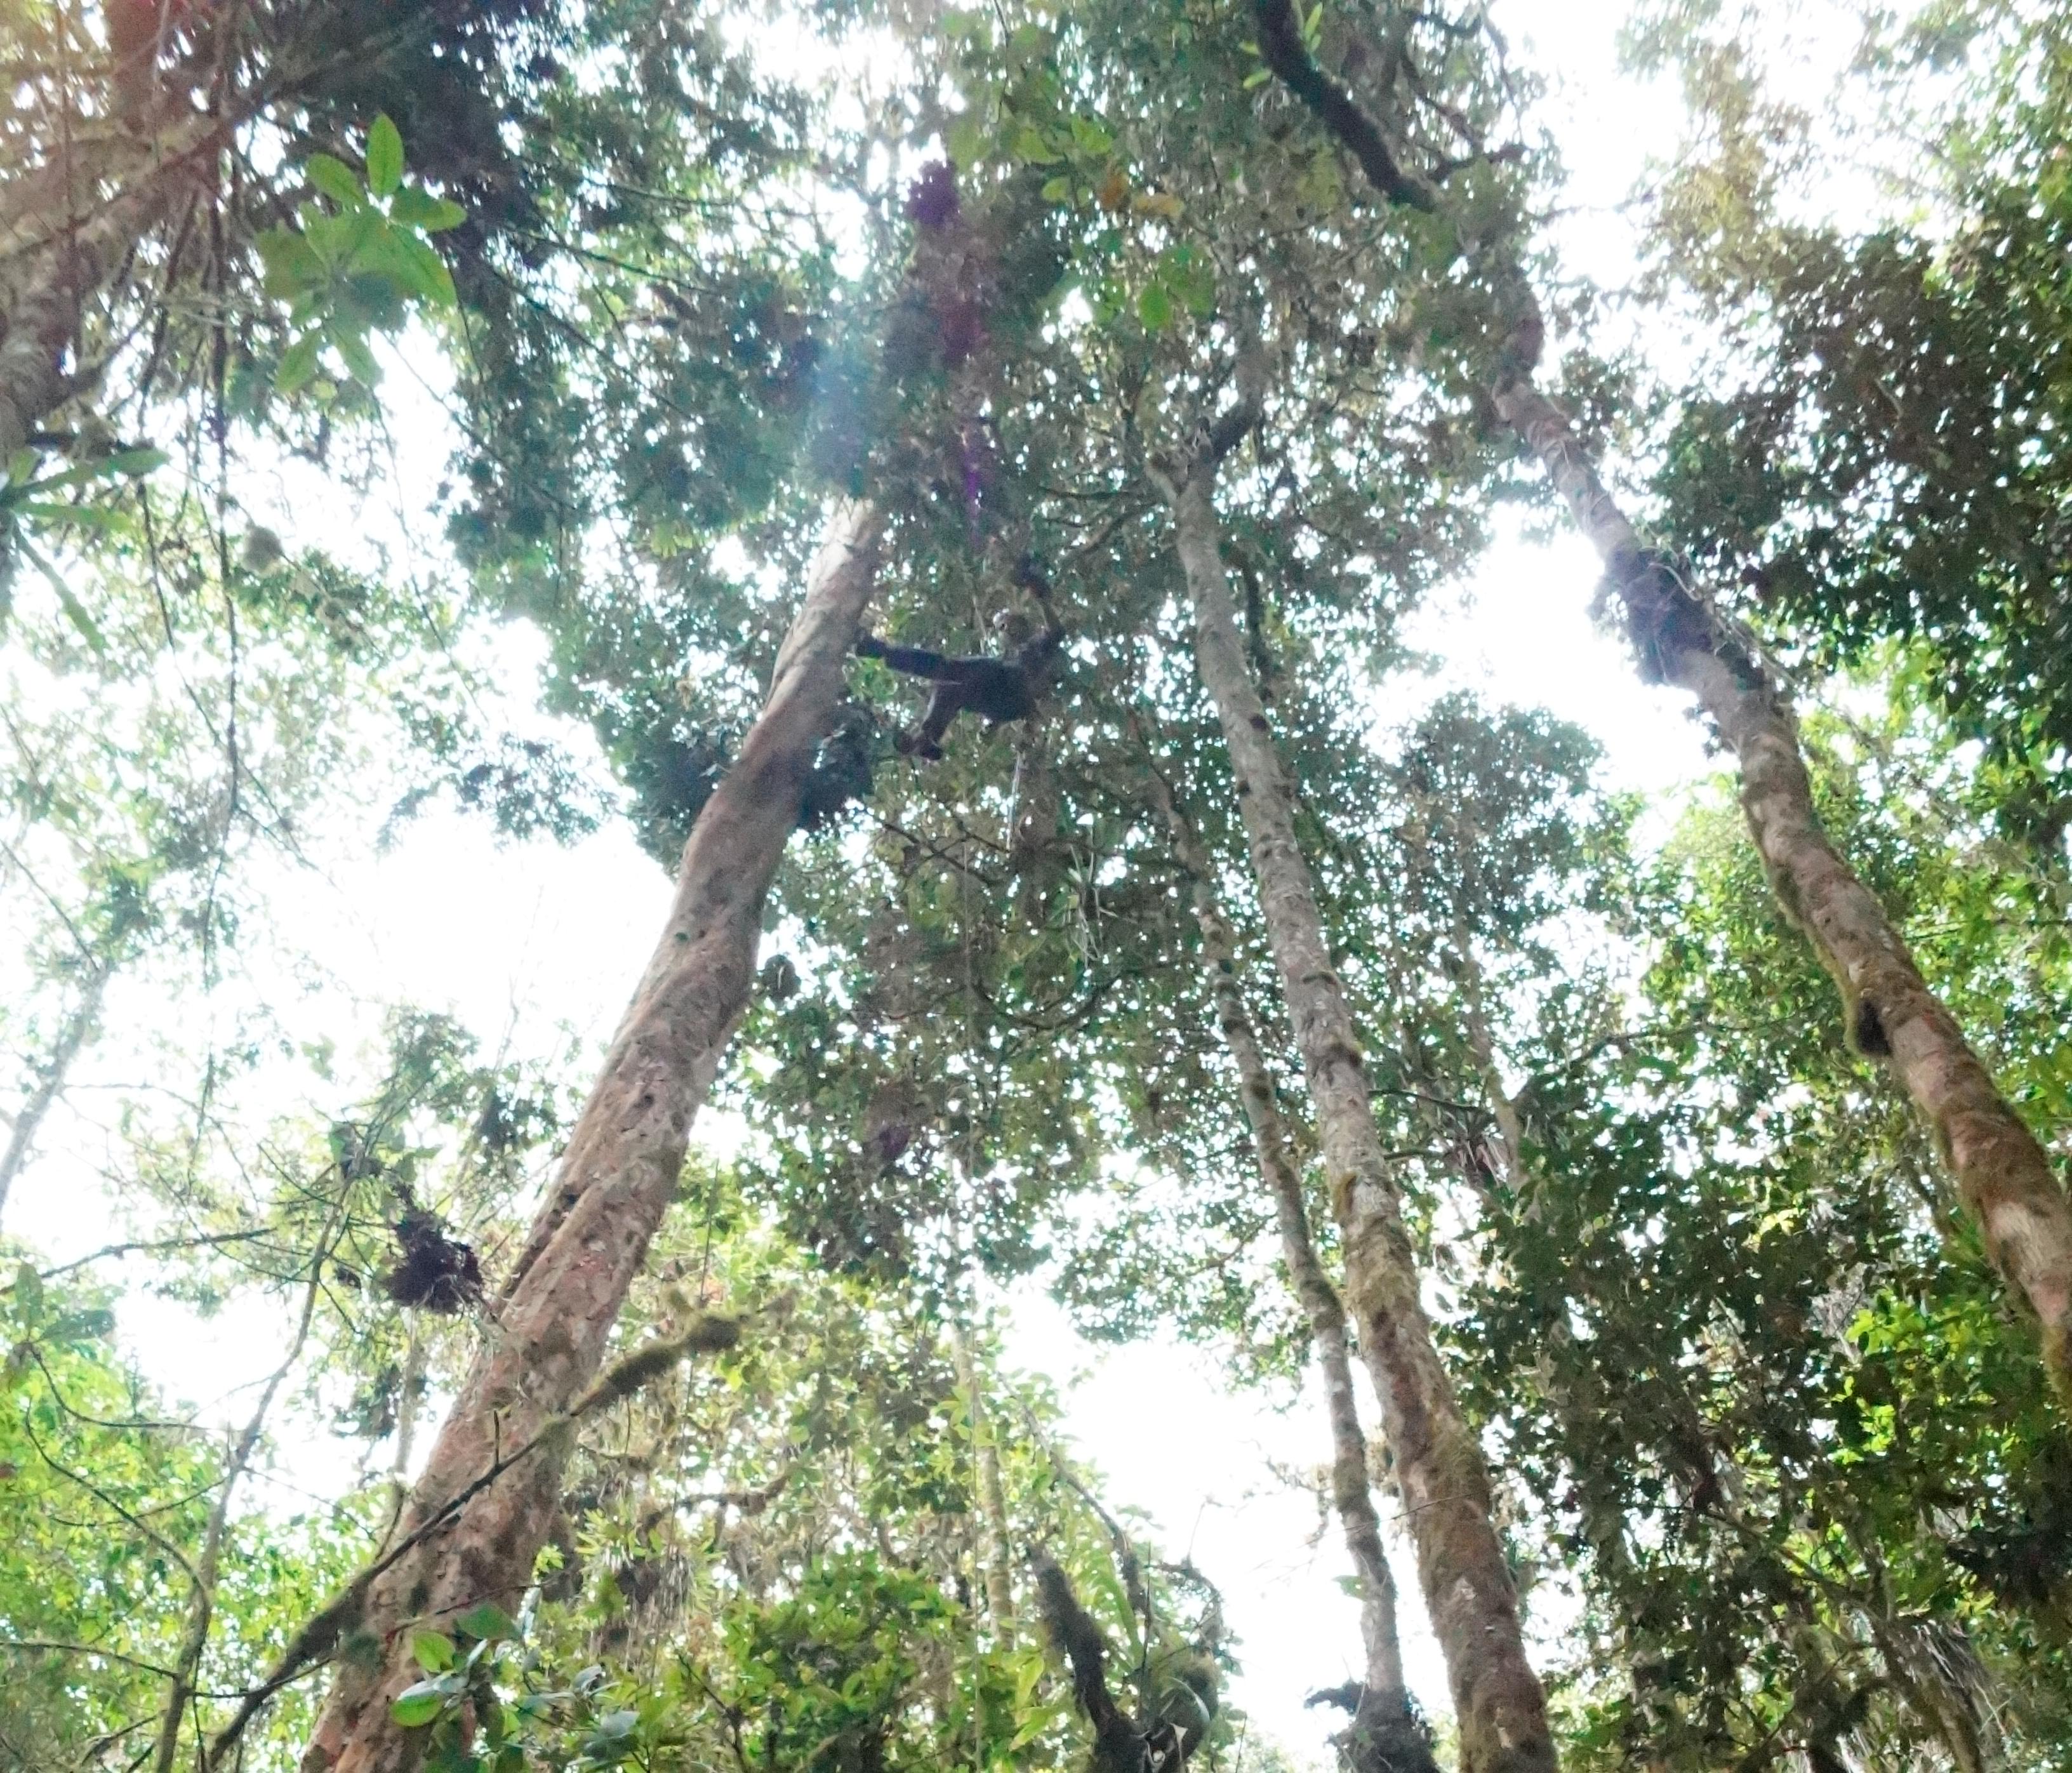 Researcher in the tree canopy conducting research